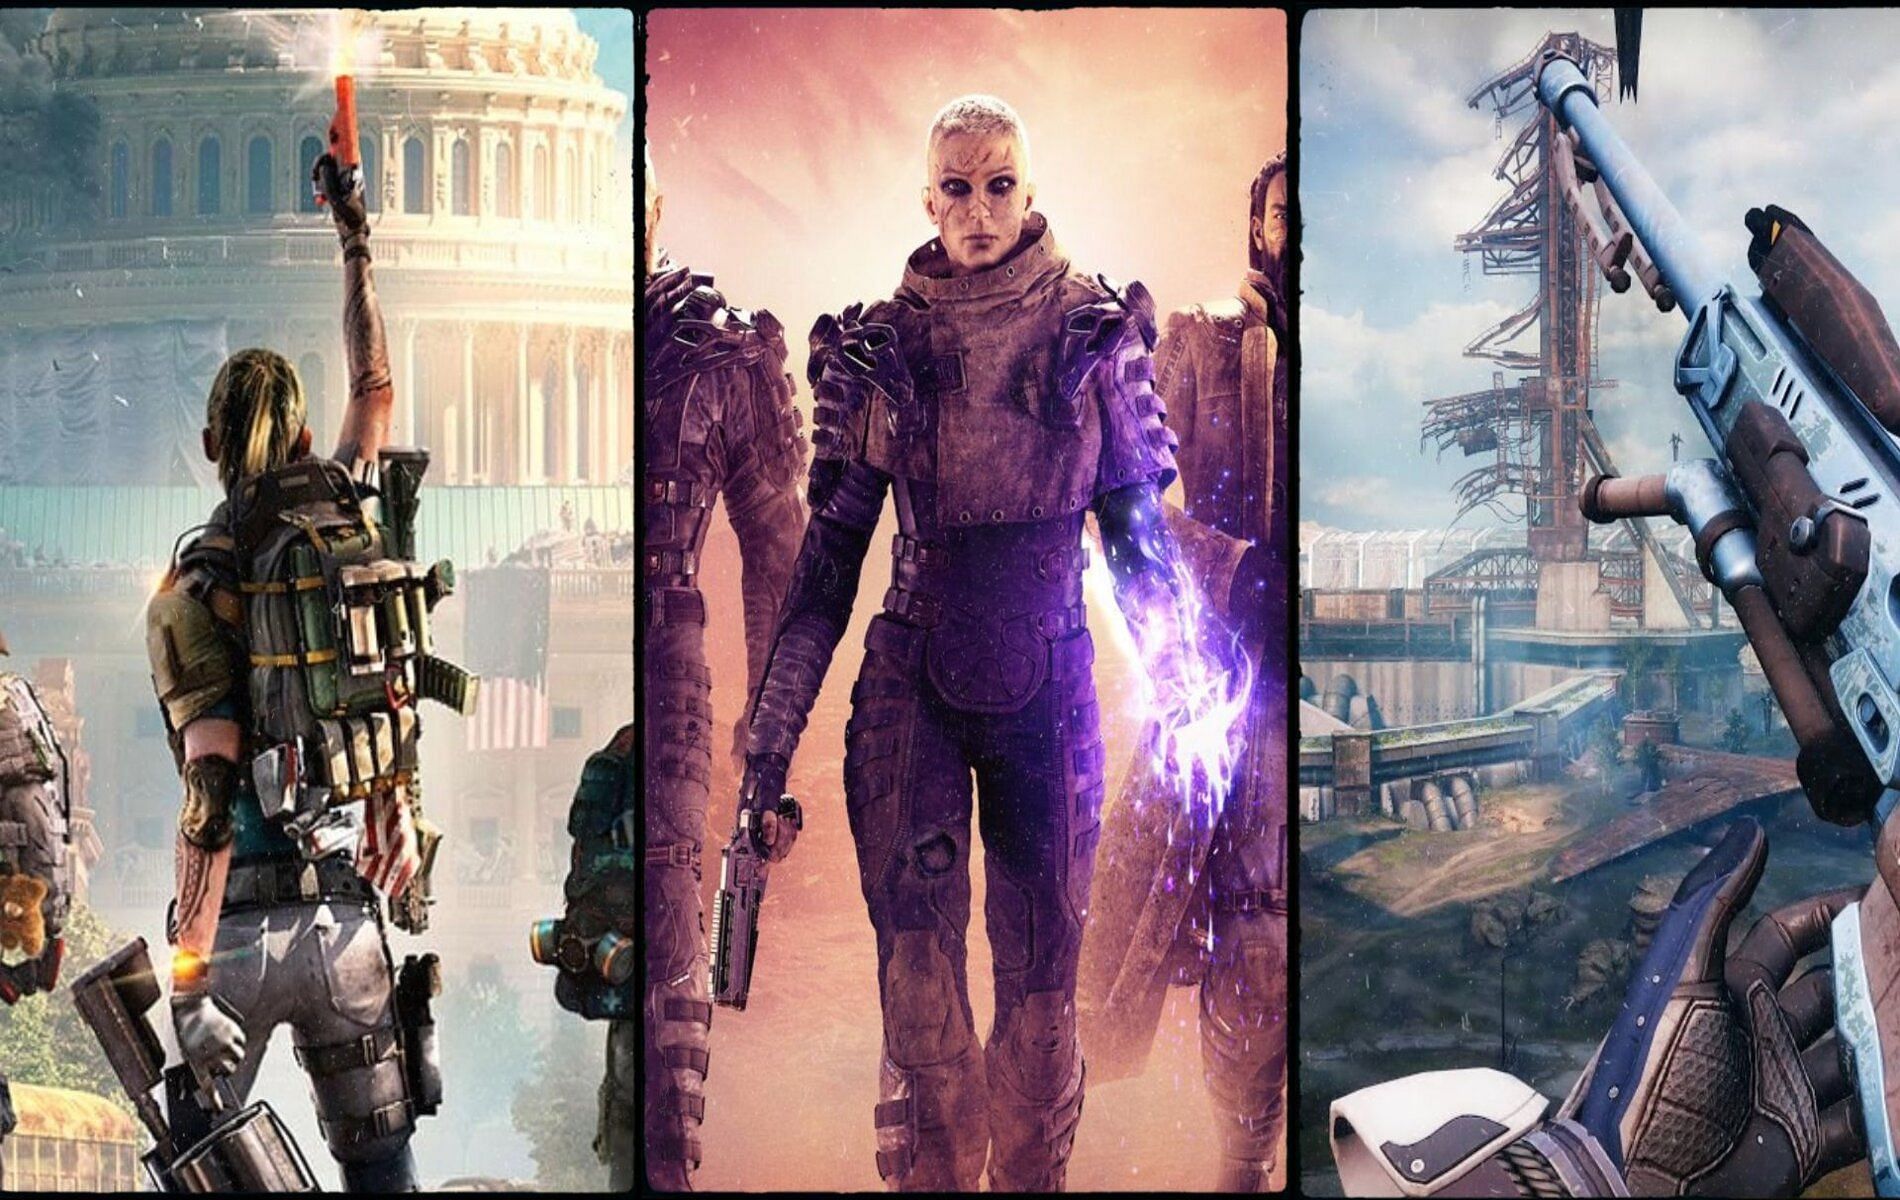 Cover art and screenshots from Division 2, Outriders and Destiny 2